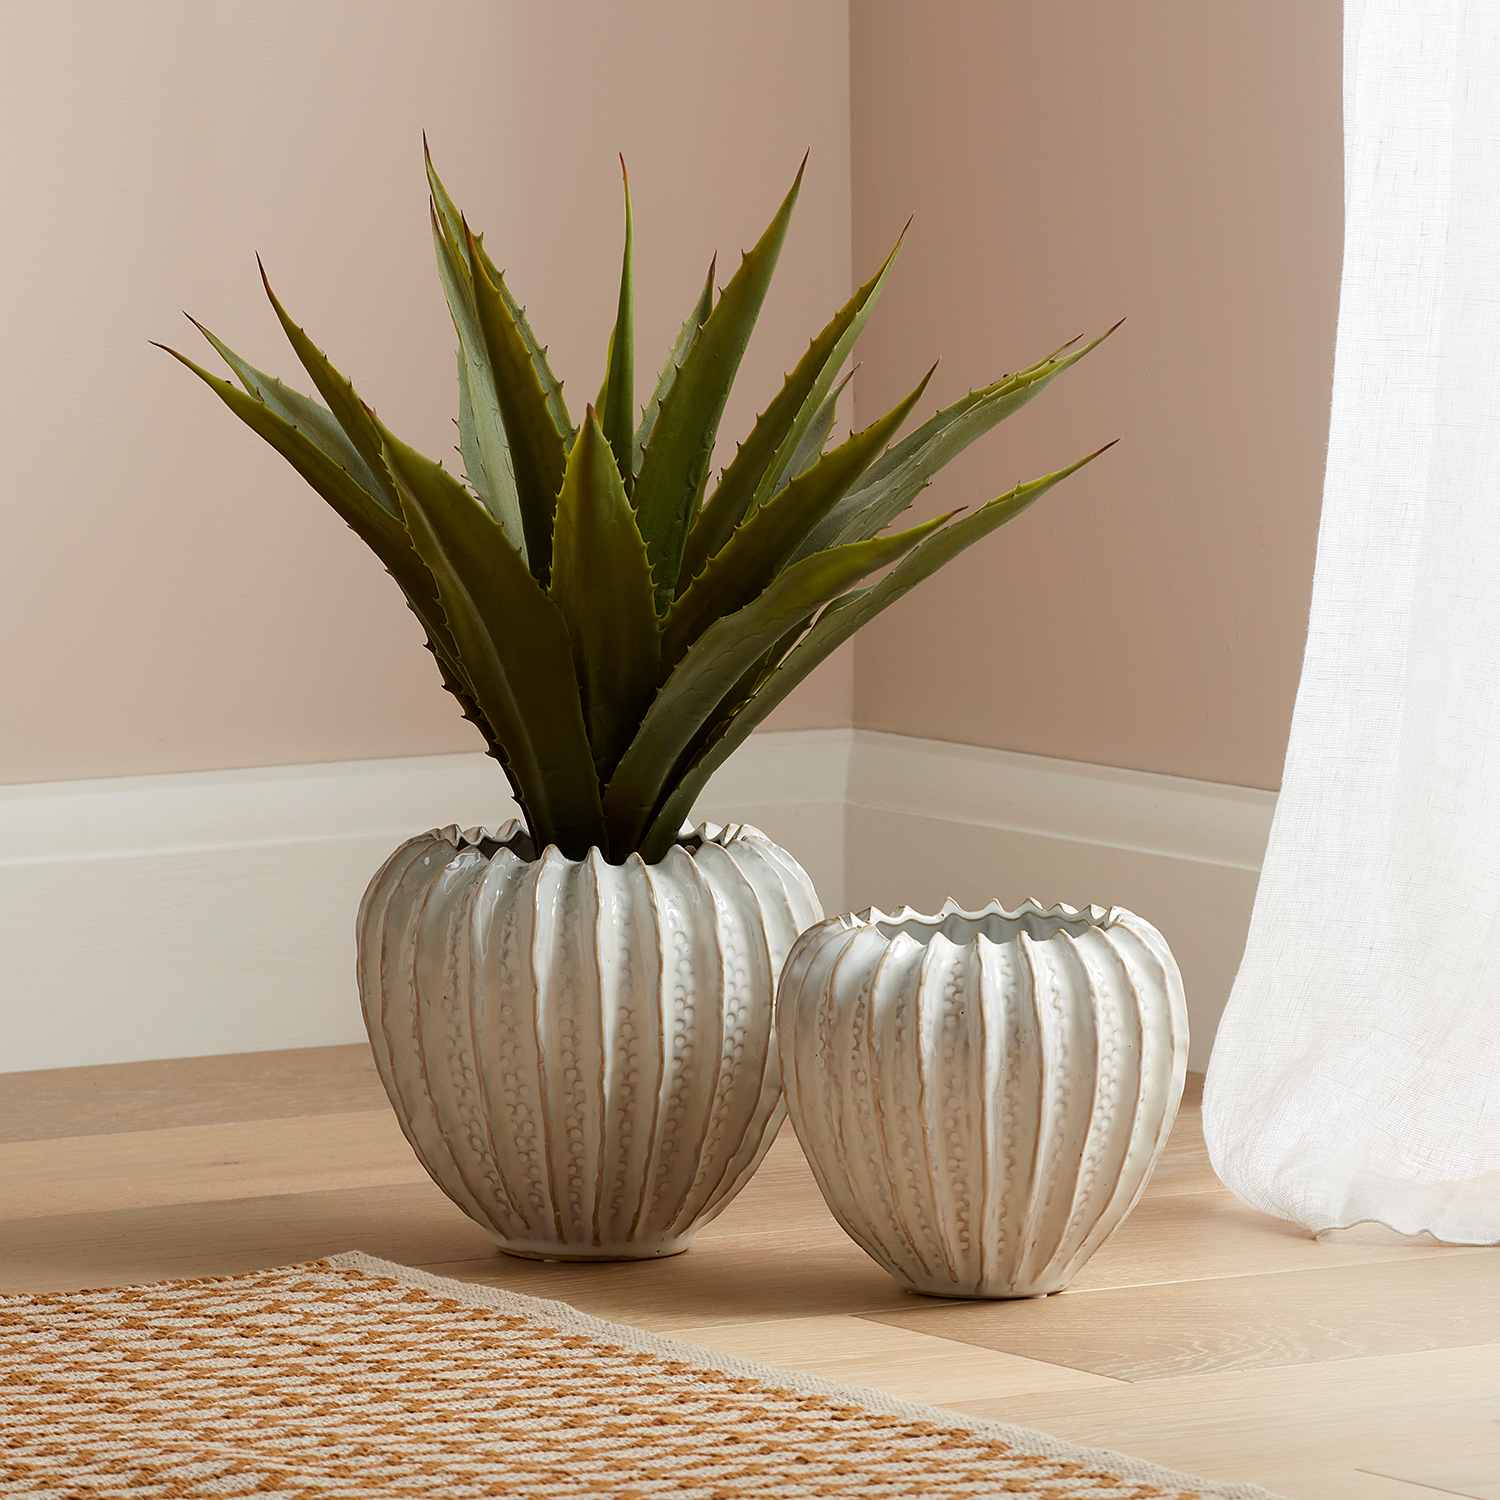 small chelburn plant pot and large chelburn plant pot on a wooden floor